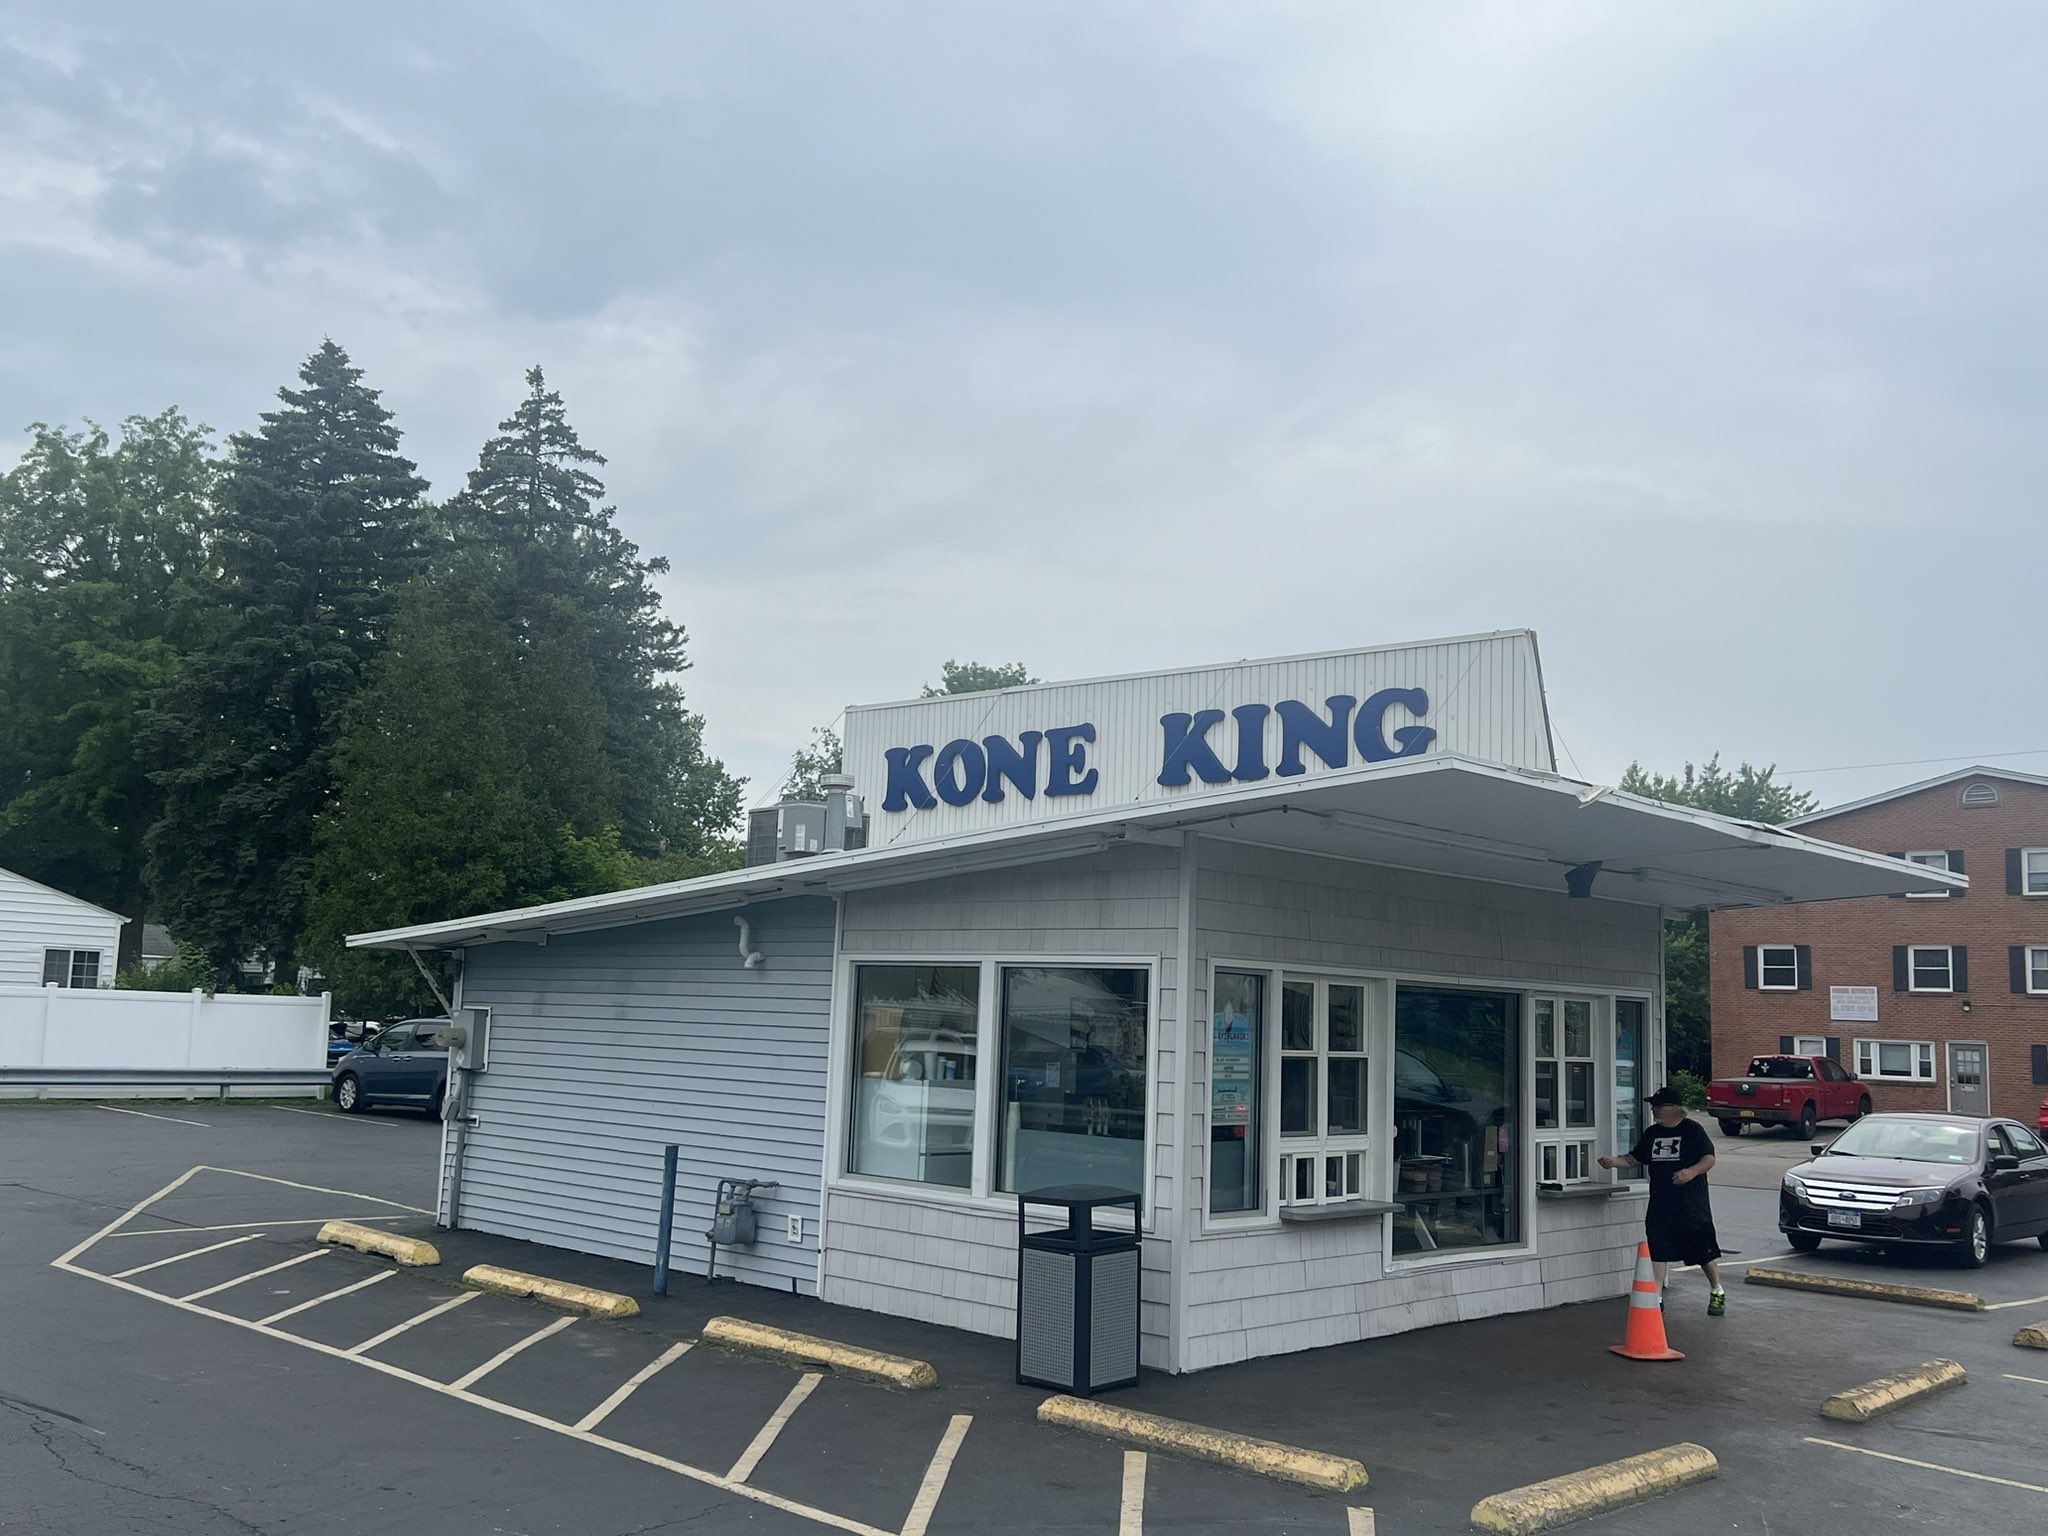 Kone King Car Accident: Drunk driver crashes into a cone at Cone King in West Seneca, NY